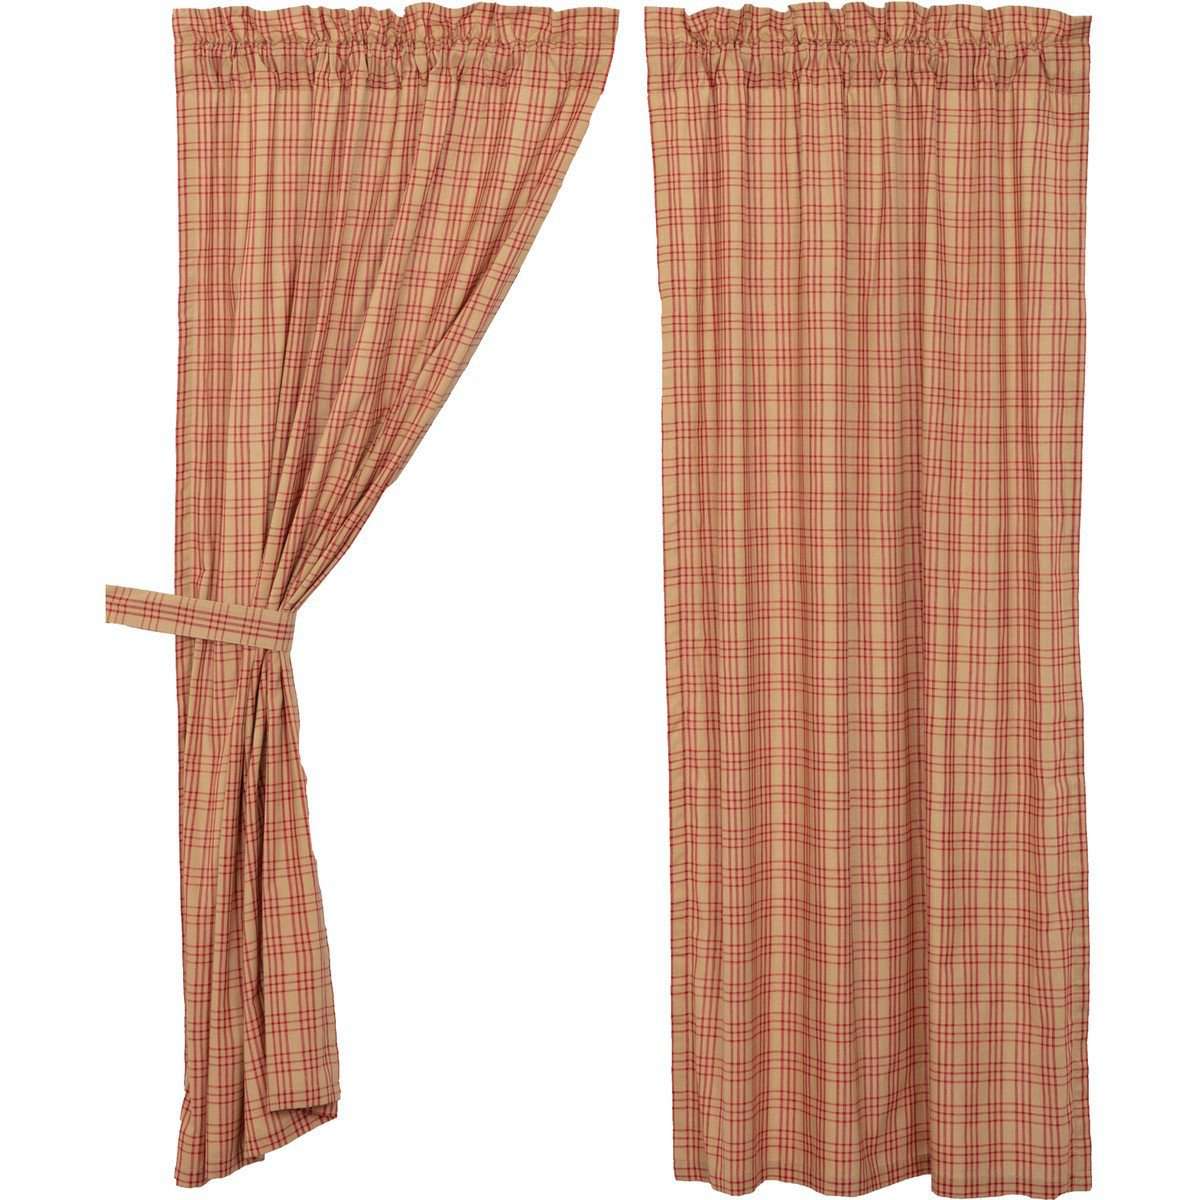 Sawyer Mill Red Plaid Short Panel Curtain Set of 2 63"x36" VHC Brands - The Fox Decor